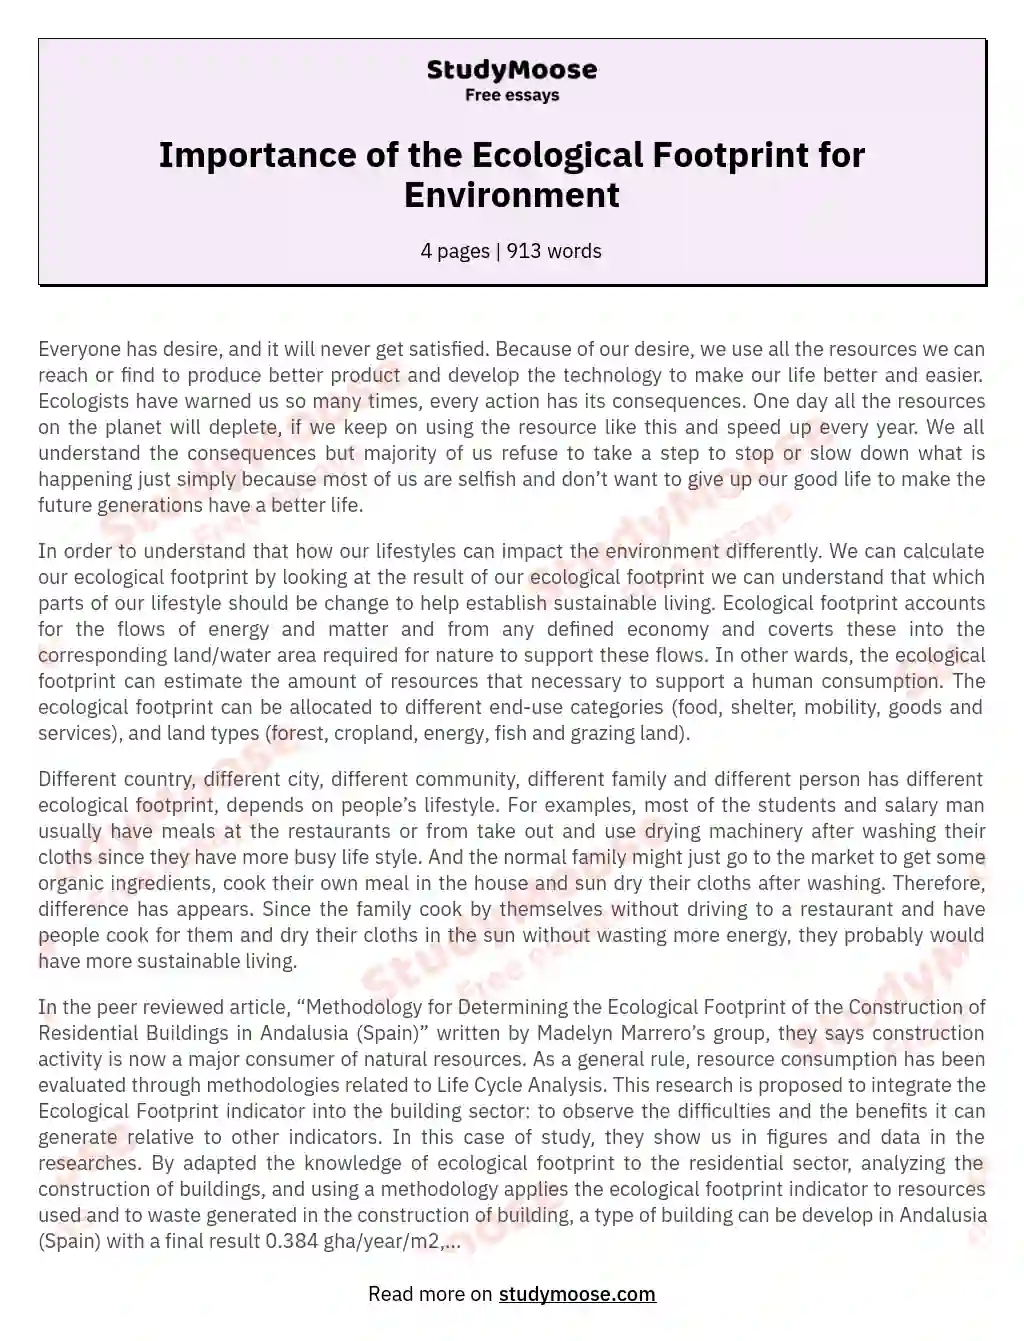 Importance of the Ecological Footprint for Environment